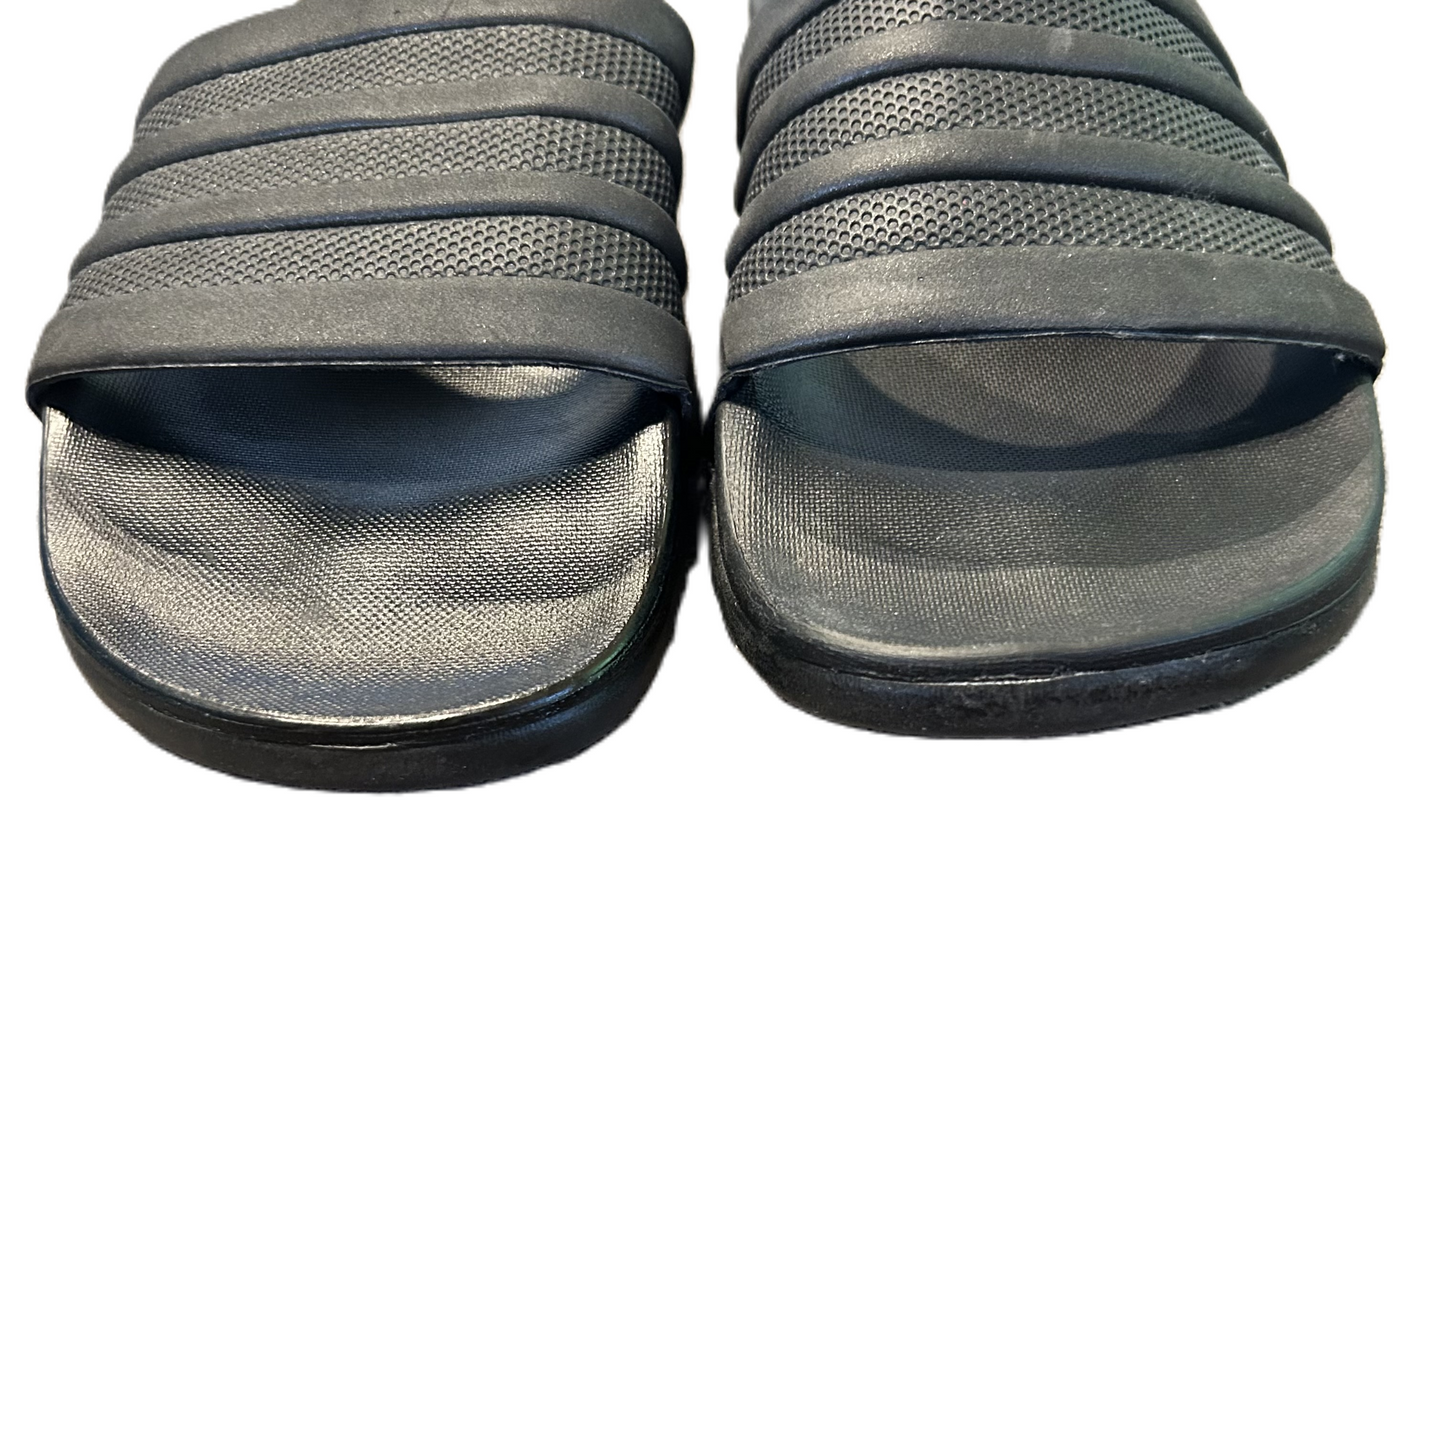 Black Sandals Sport By Adidas, Size: 6